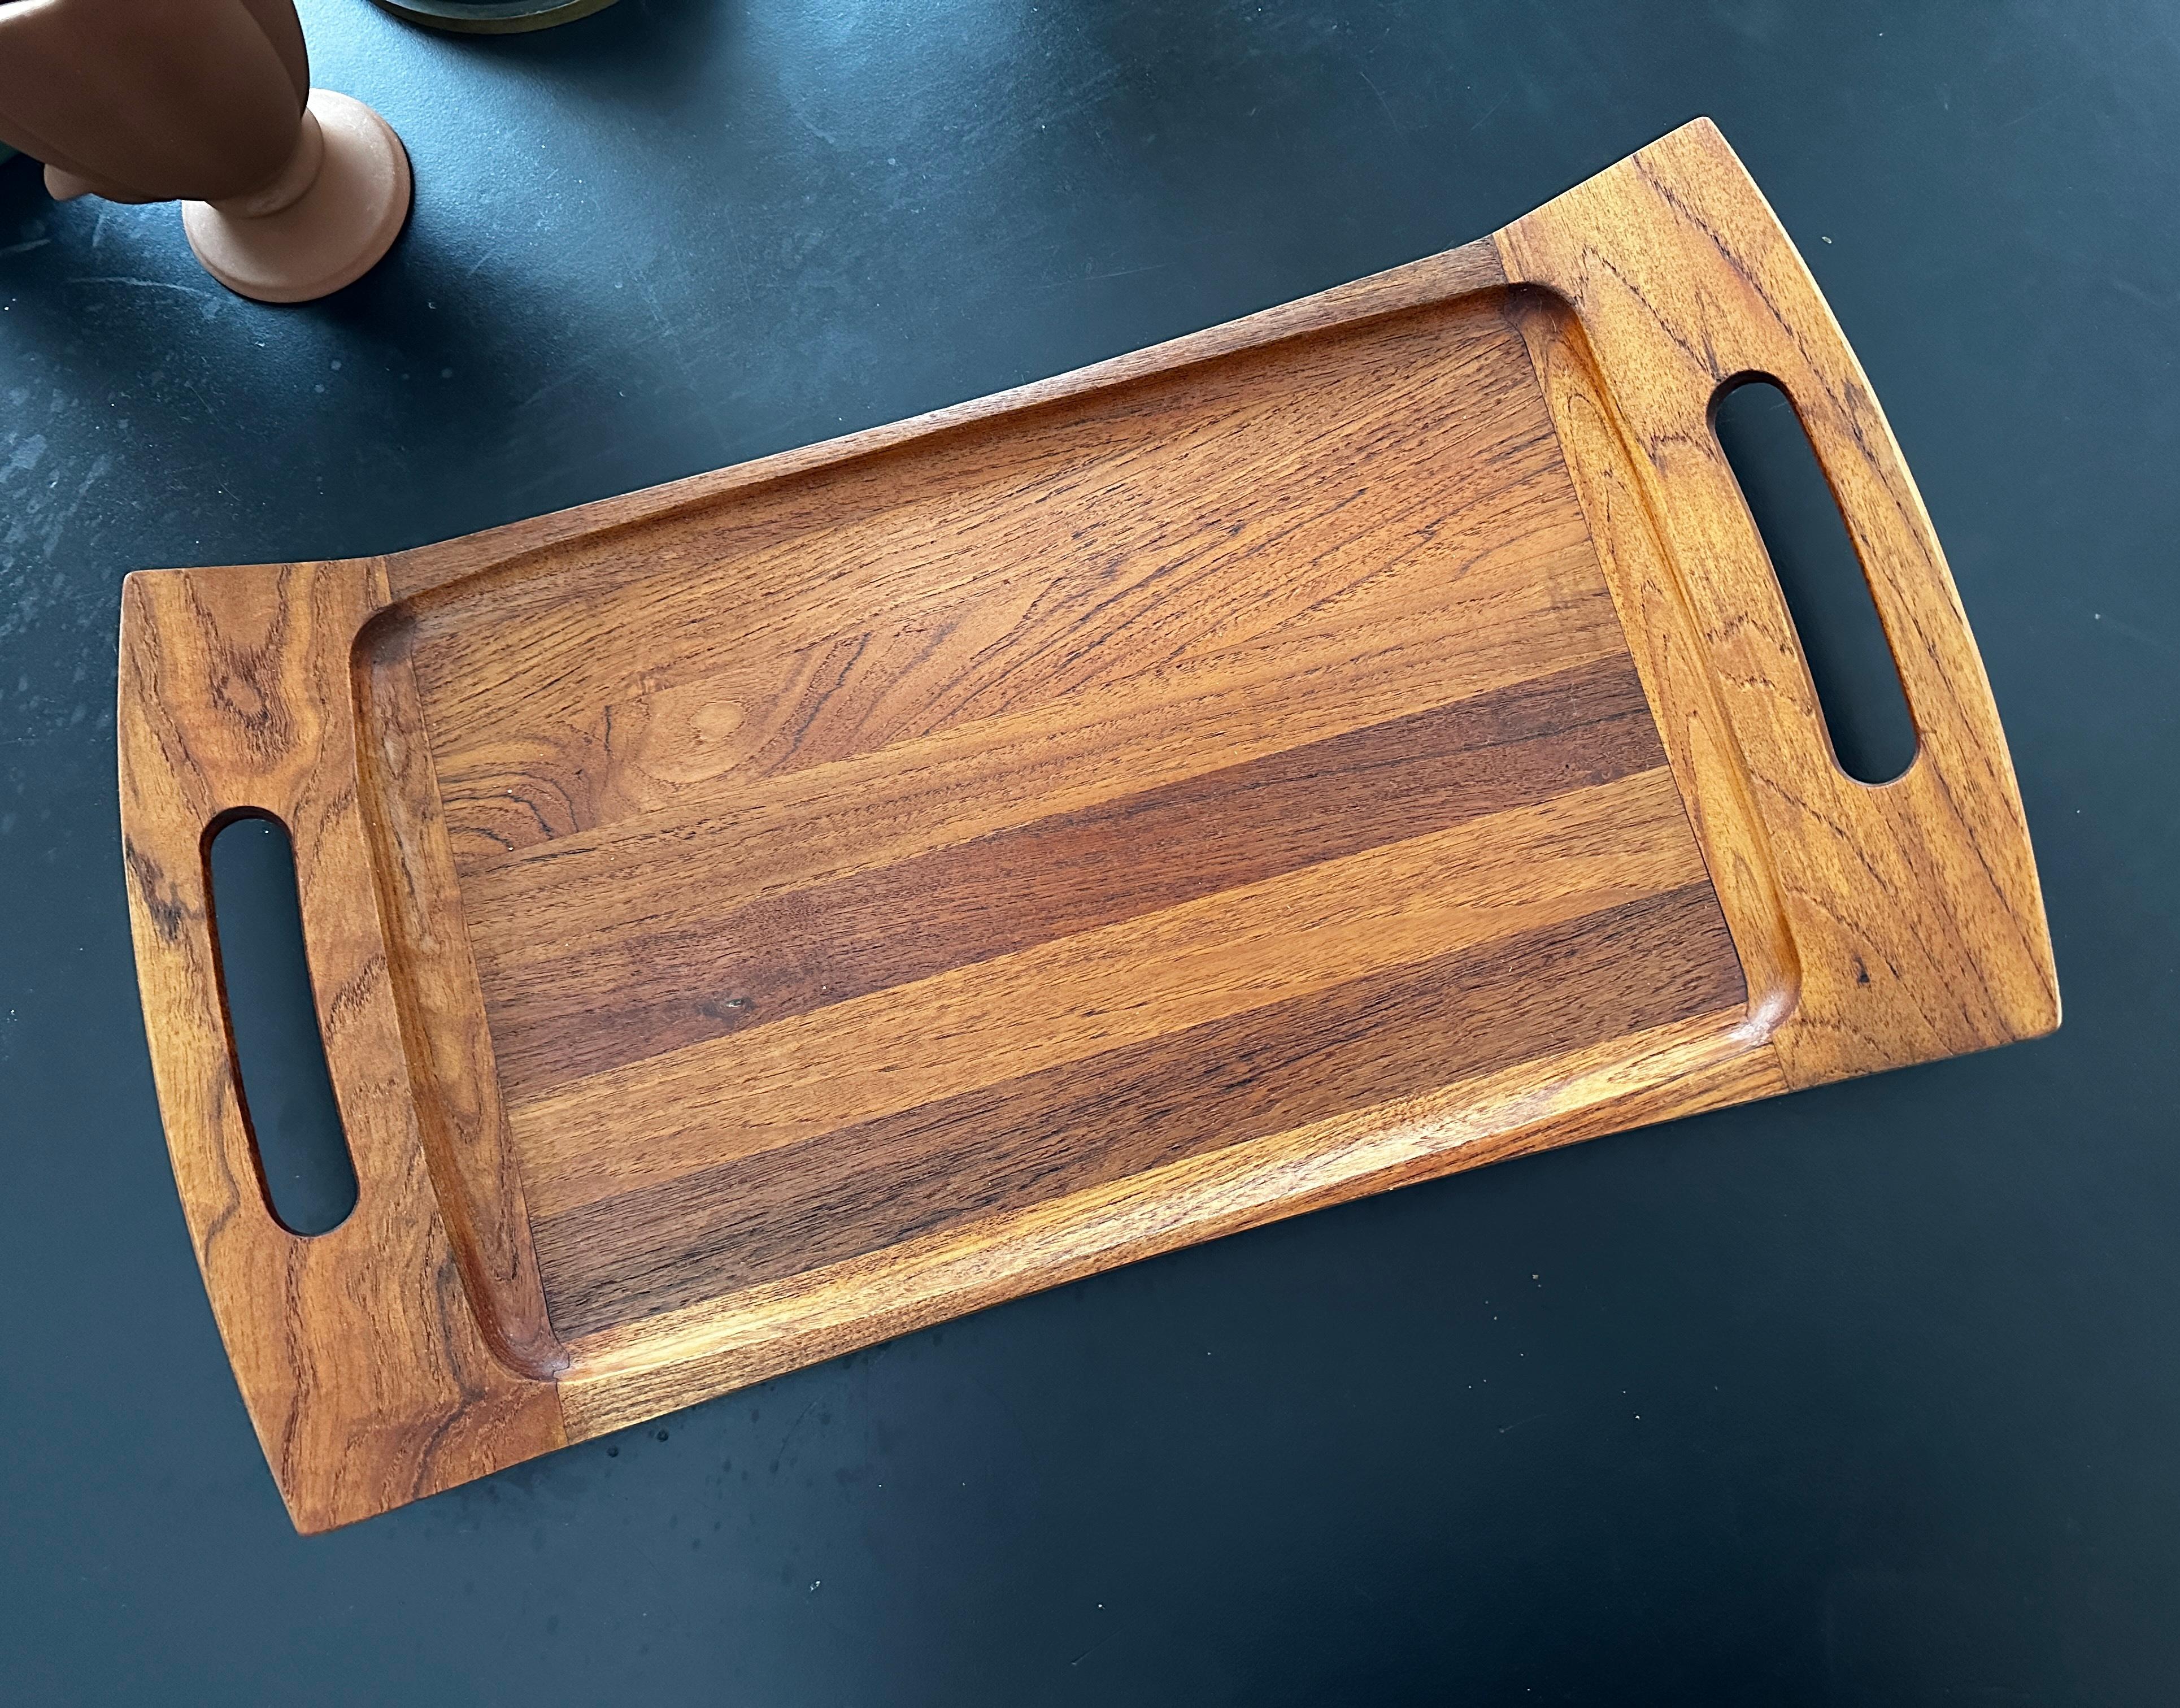 Vintage teak tray designed by Jens Quistgaard for Dansk in the 1960's.  The tray is signed on the back and measures 24.75 inches long, 12.75 inches wide and 2.75 inches high.